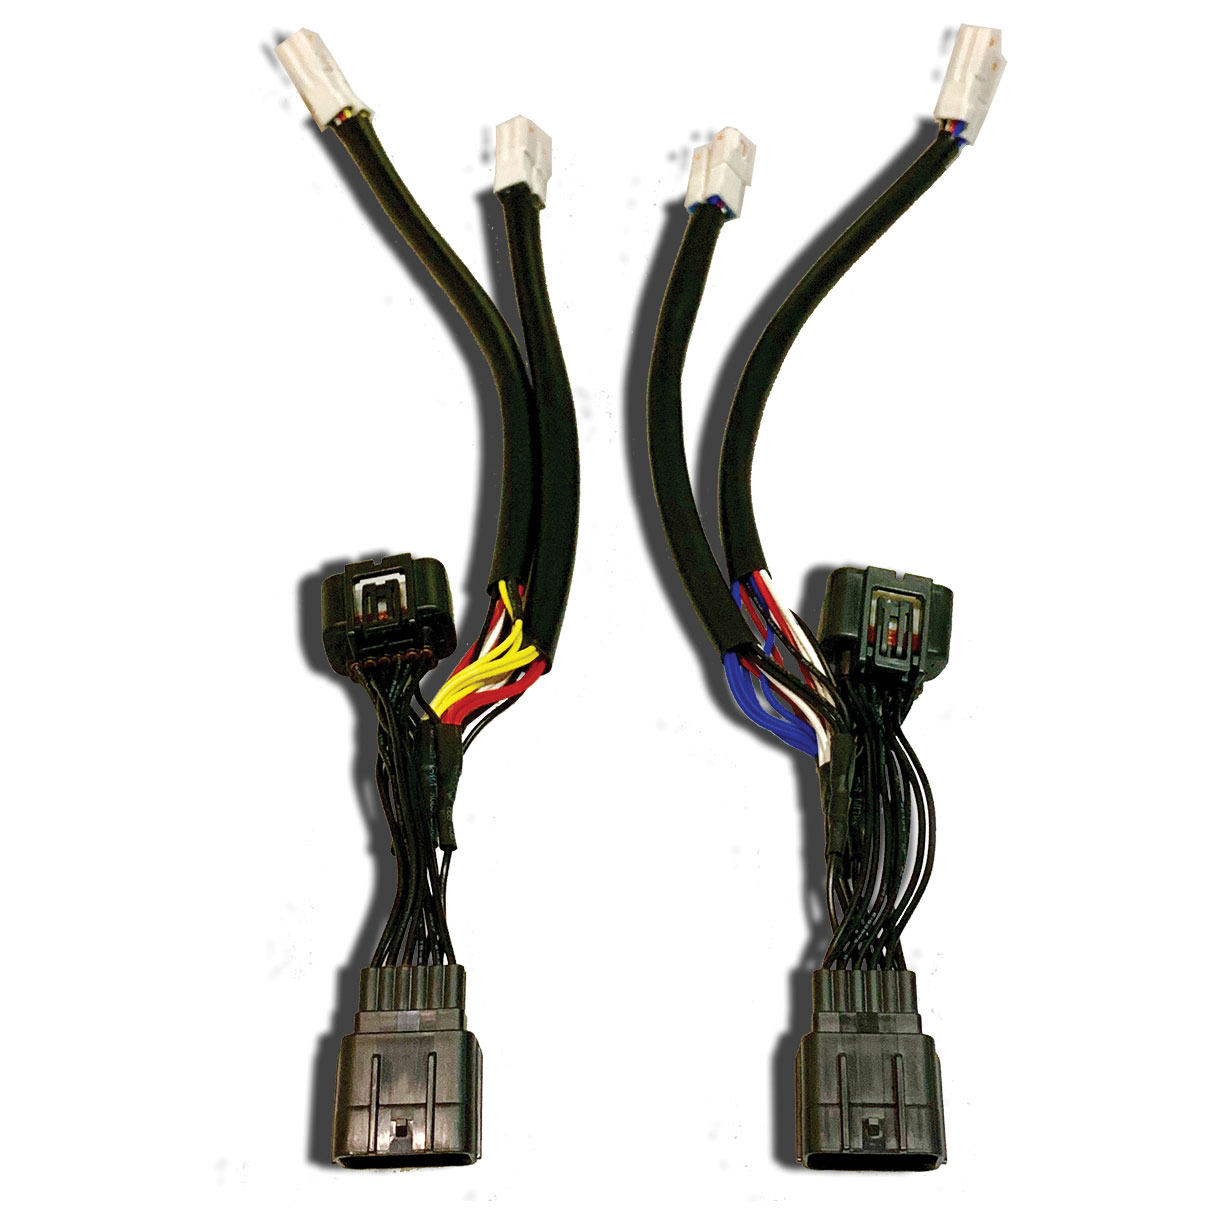 PathfinderLED Plug-and-Play Cable Harness